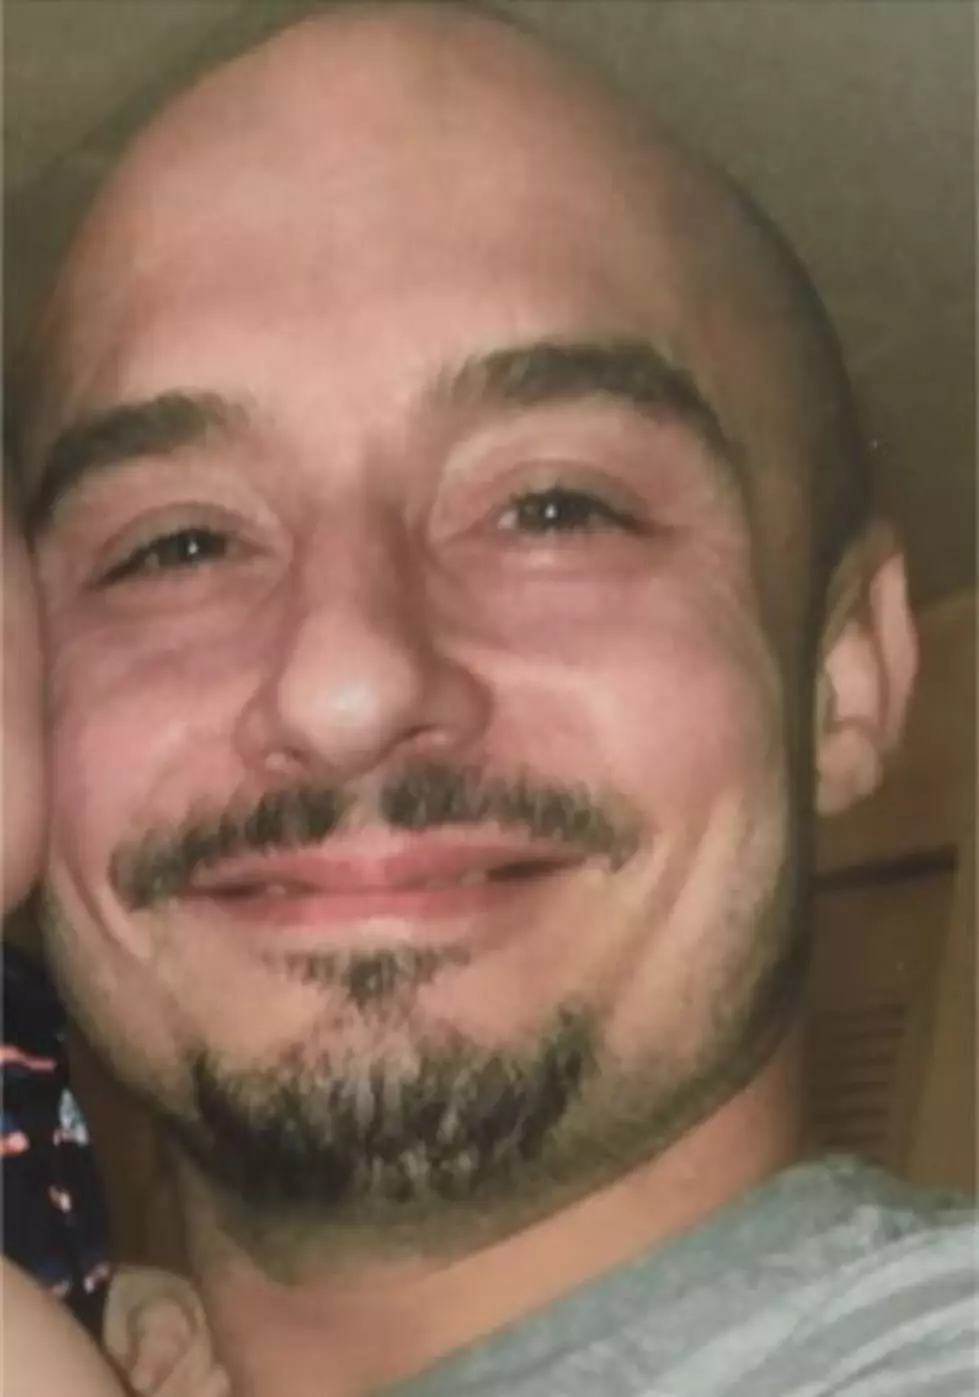 A Search Is Underway For A Missing Dover, NH Man